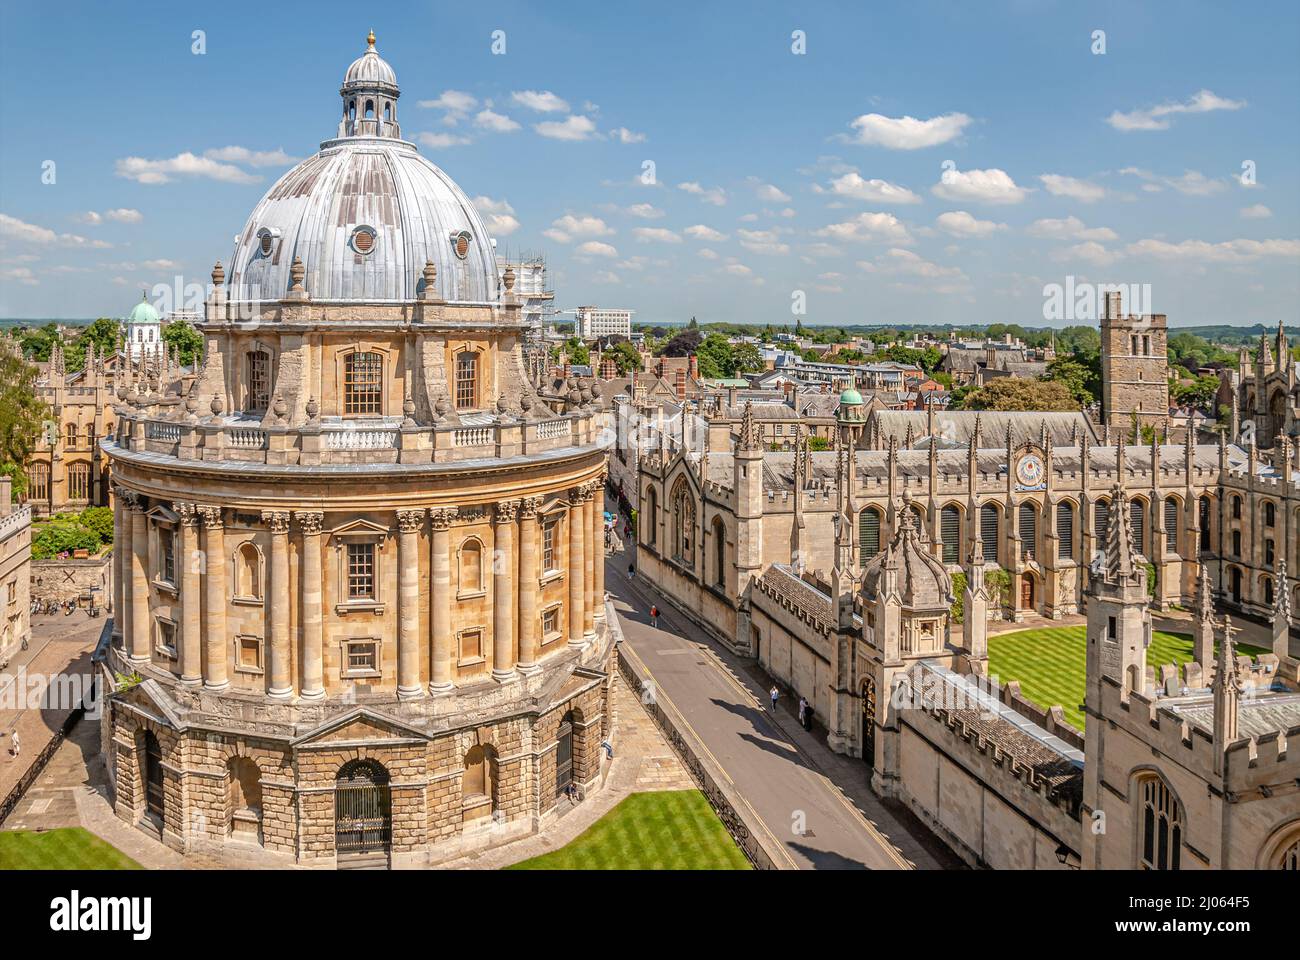 Radcliffe Camera building in Oxford, Oxfordshire, England Stock Photo